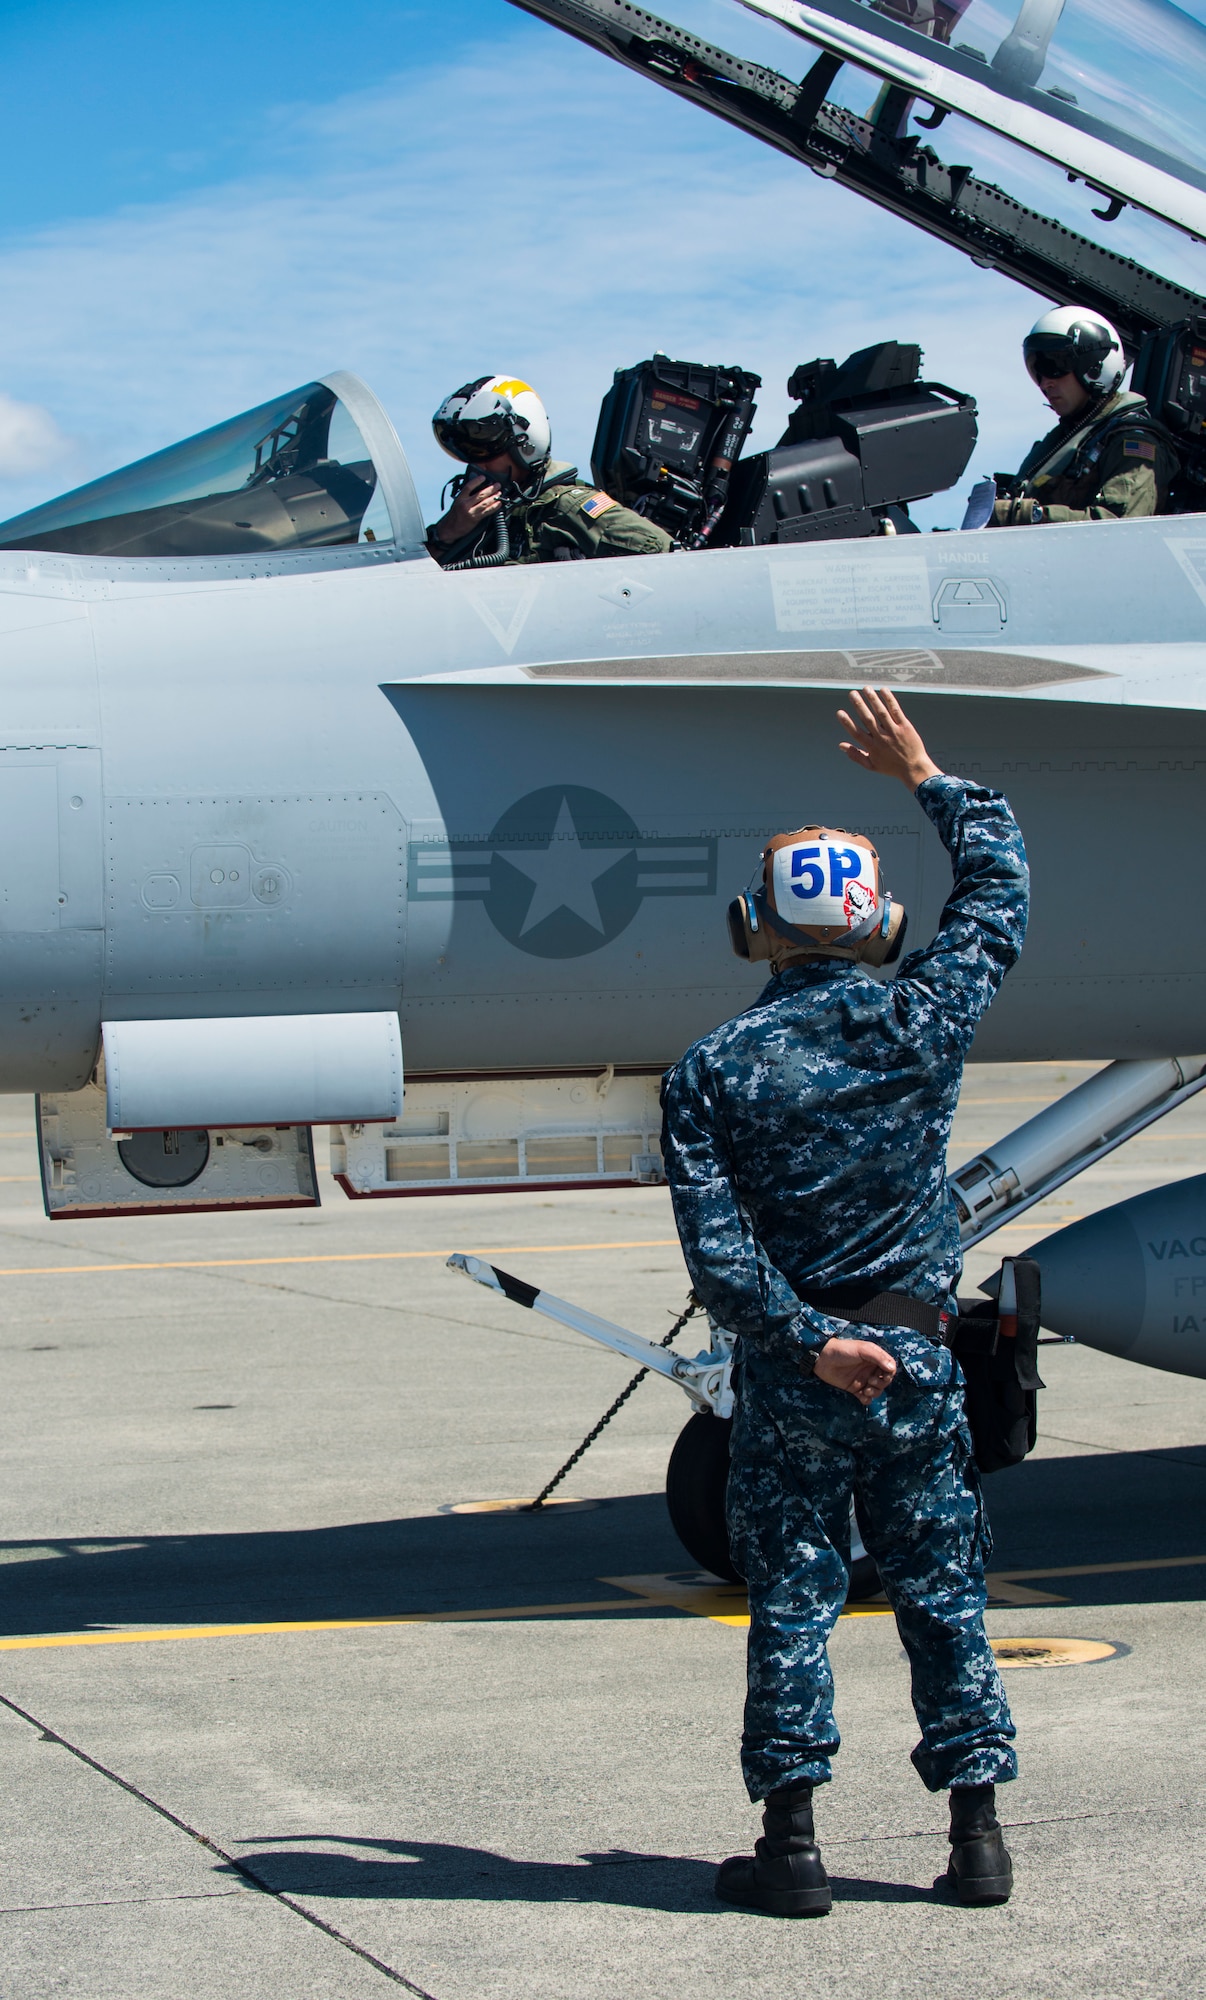 A Navy crew chief signals to the pilot and the electronic warfare officer during flight preparation at Naval Air Station Whidbey Island, Wash., August 6, 2014. Recently, the role of electronic attack has transitioned to the EA-18G Growler. (U.S. Air Force photo by Airman 1st Class Malissa Lott/RELEASED)